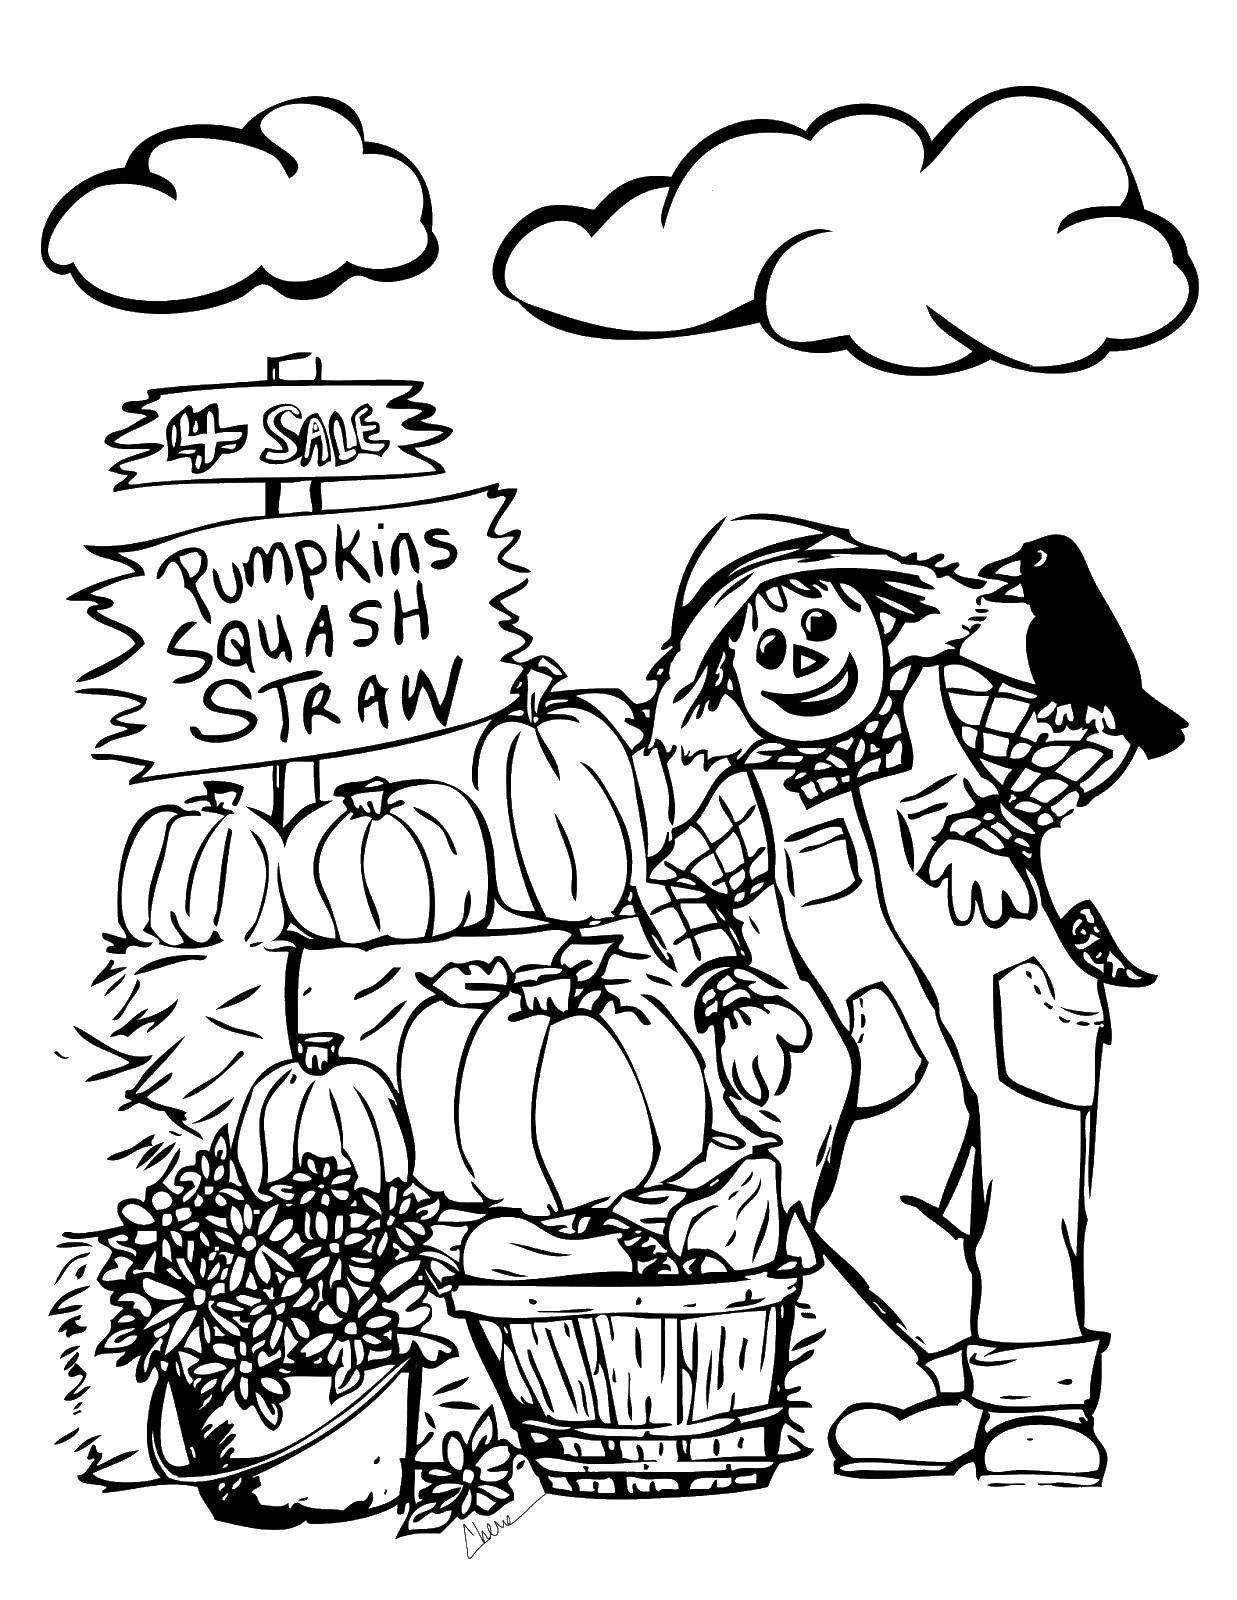 Coloring Selling pumpkins. Category Autumn. Tags:  Autumn, leaves.